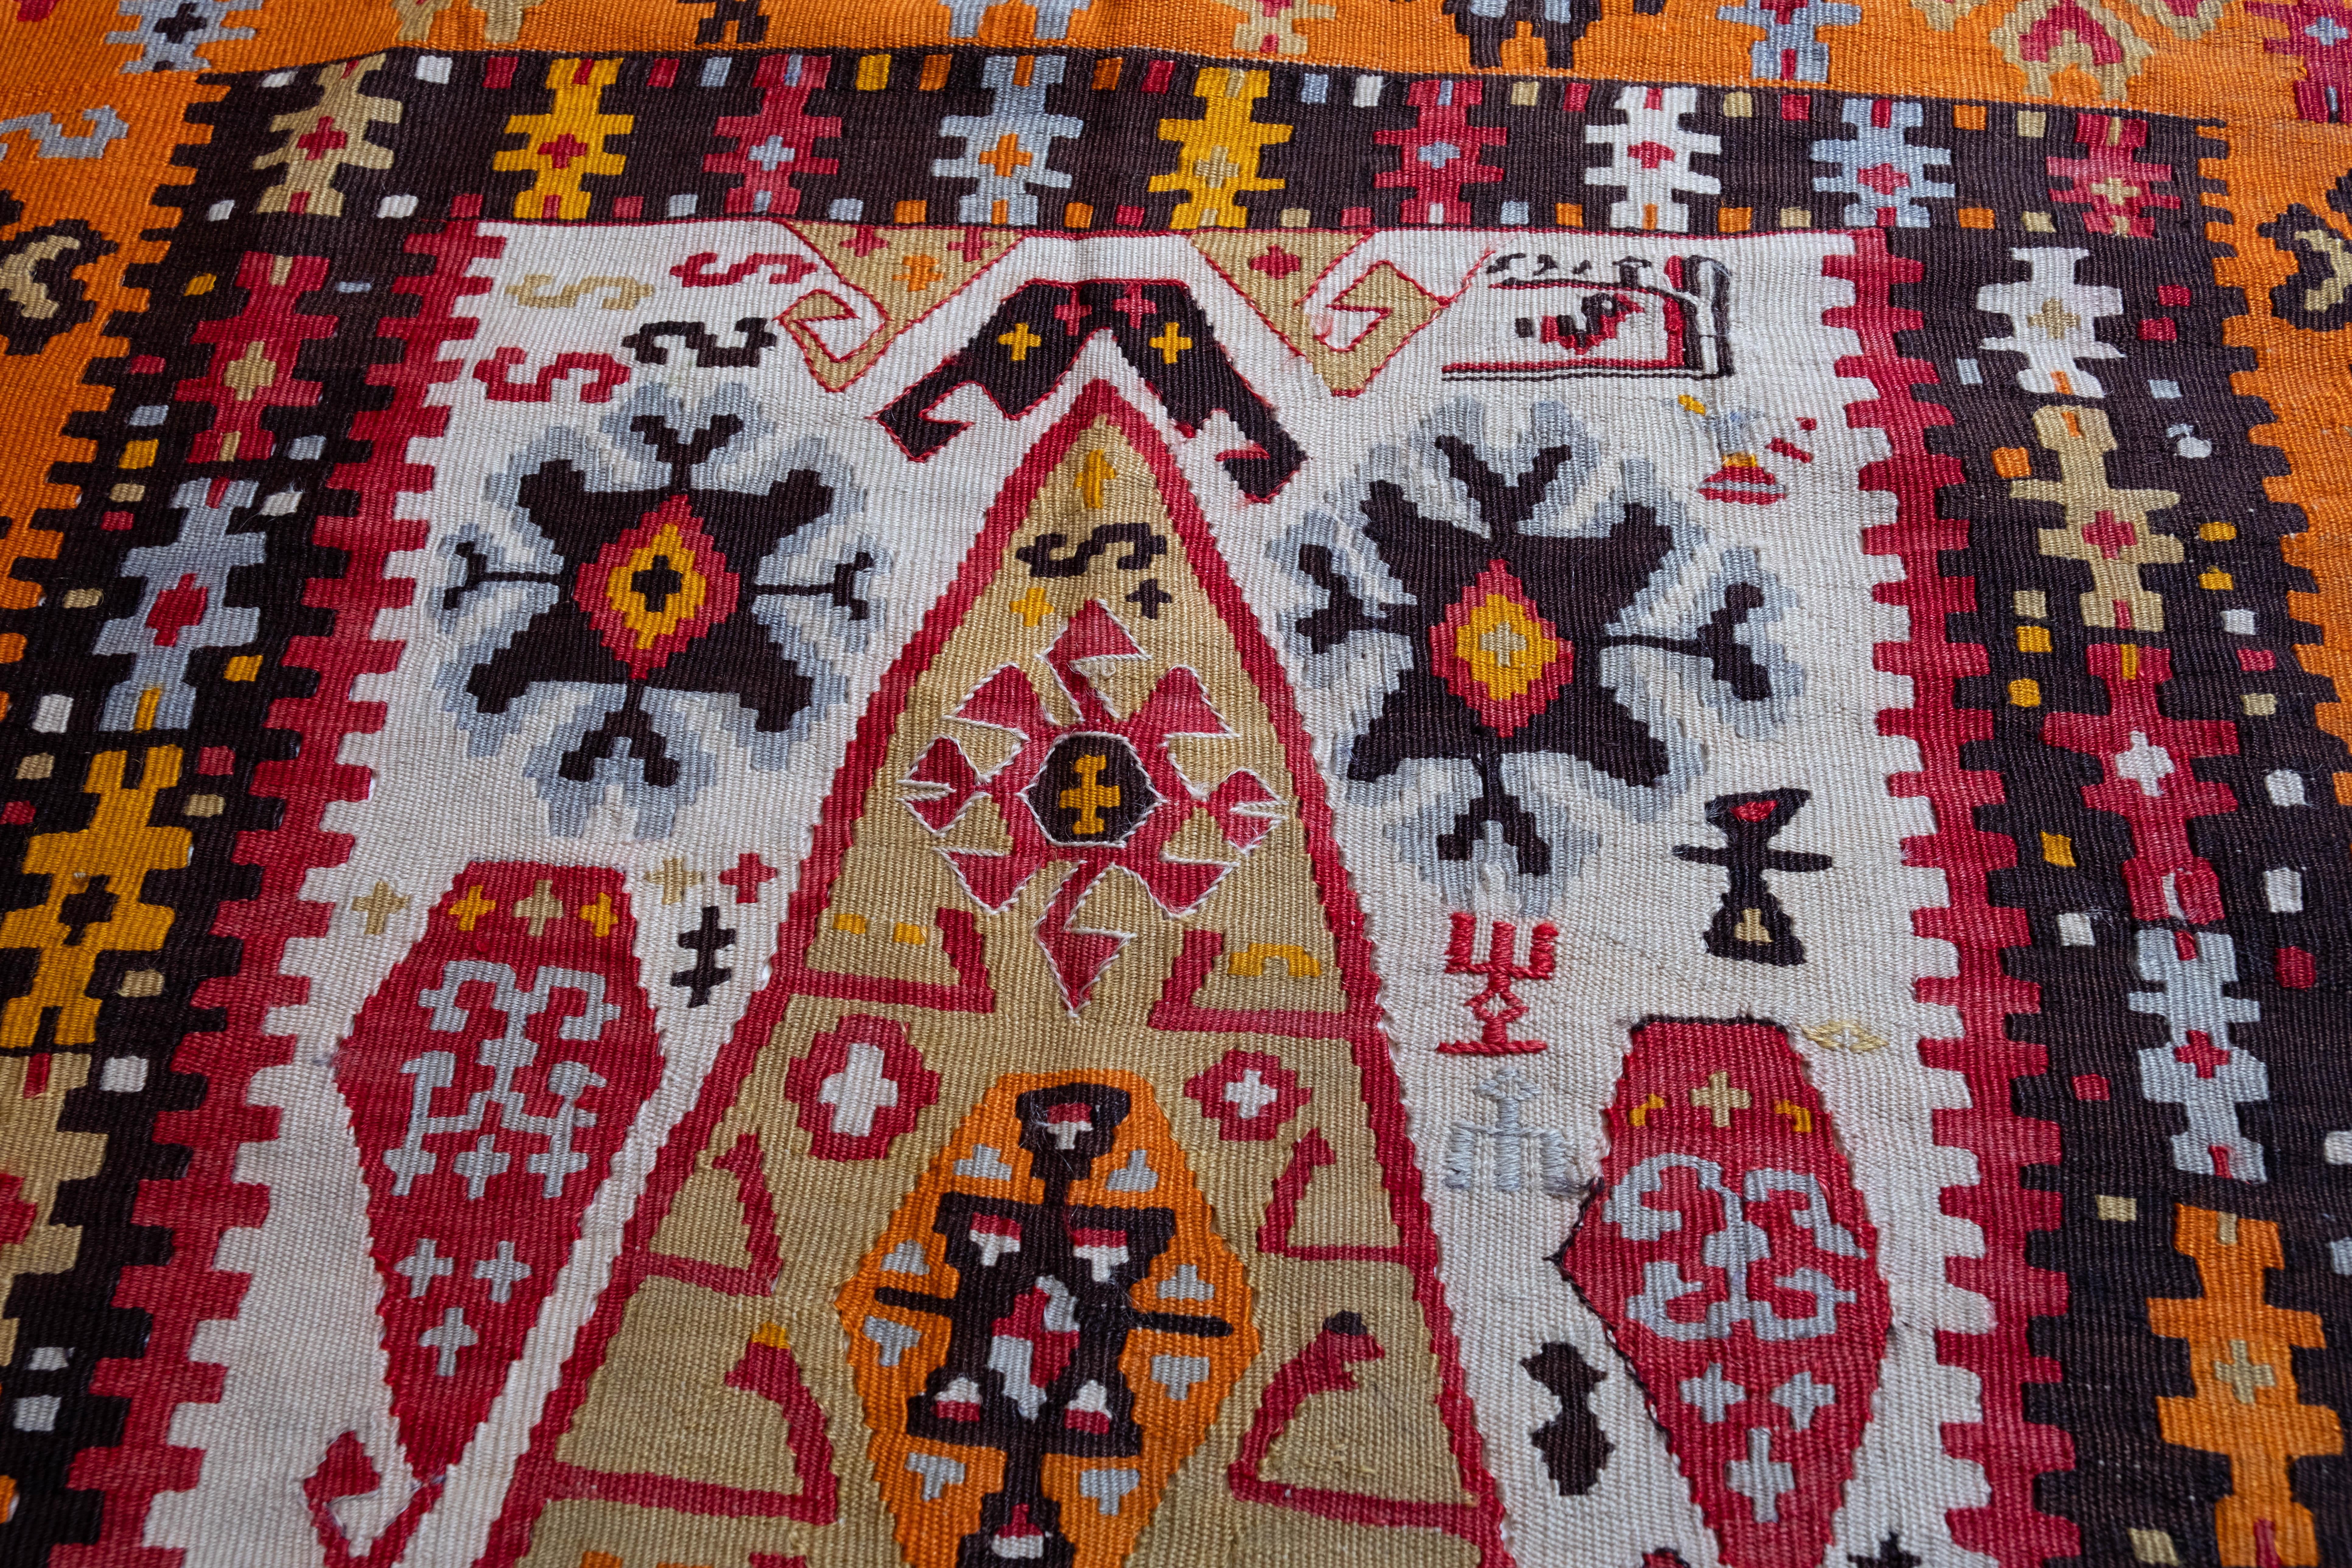 This is Eastern Anatolian Old Vintage Kilim from the Bayburt region with a rare and beautiful color composition. 

This highly collectible antique kilim has wonderful special colors and textures that are typical of an old kilim in good condition. It